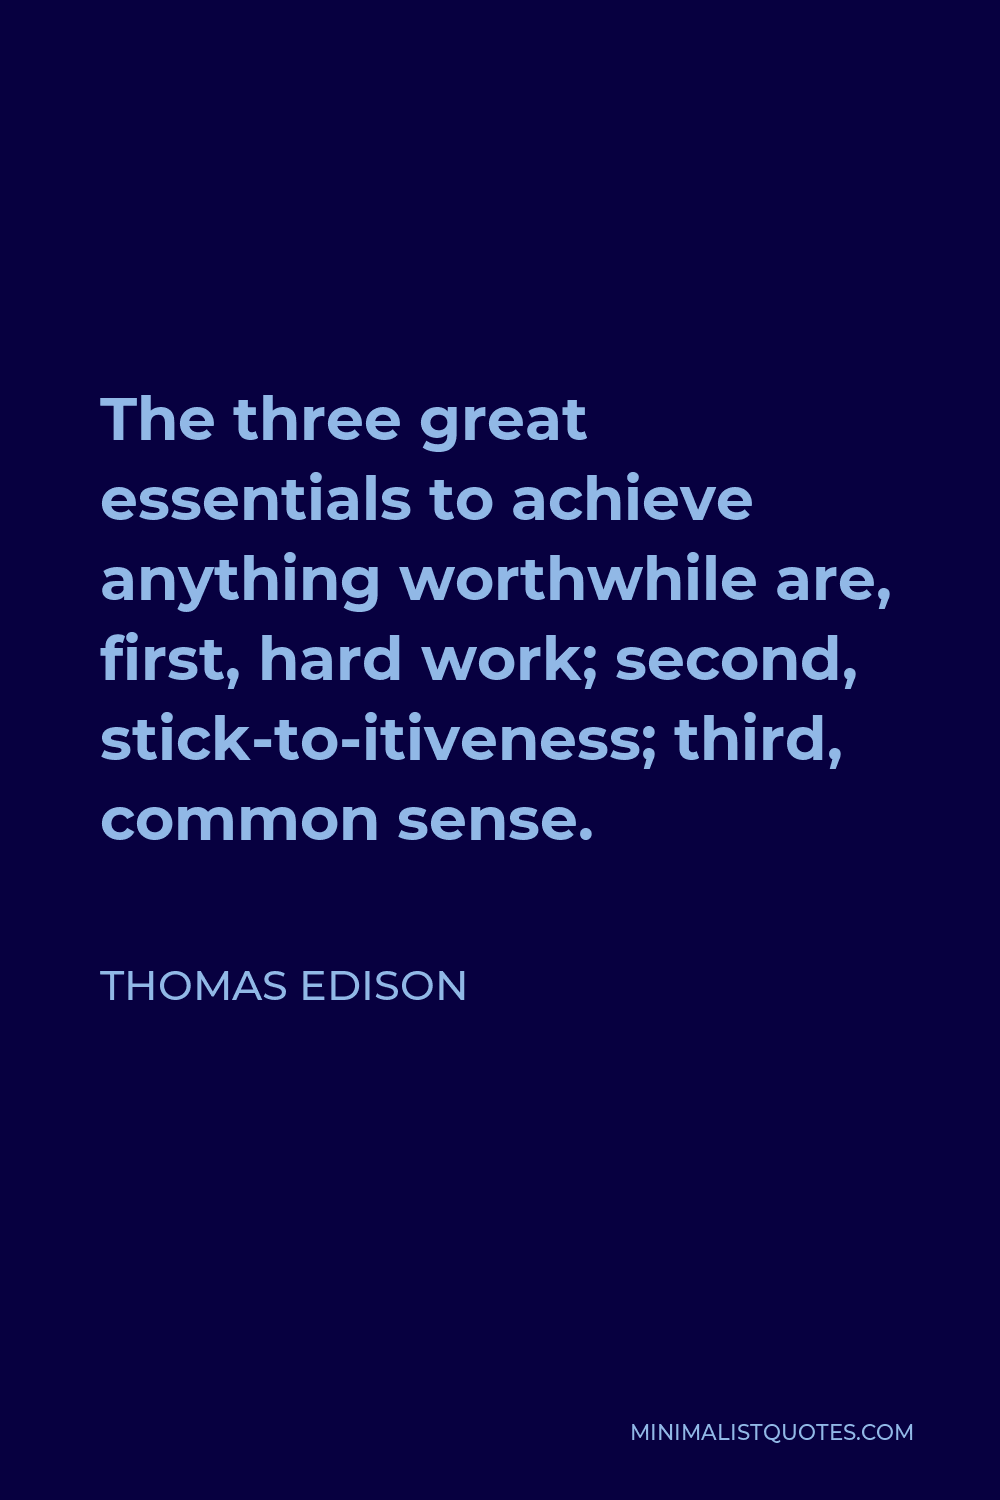 Thomas Edison Quote - The three great essentials to achieve anything worthwhile are, first, hard work; second, stick-to-itiveness; third, common sense.